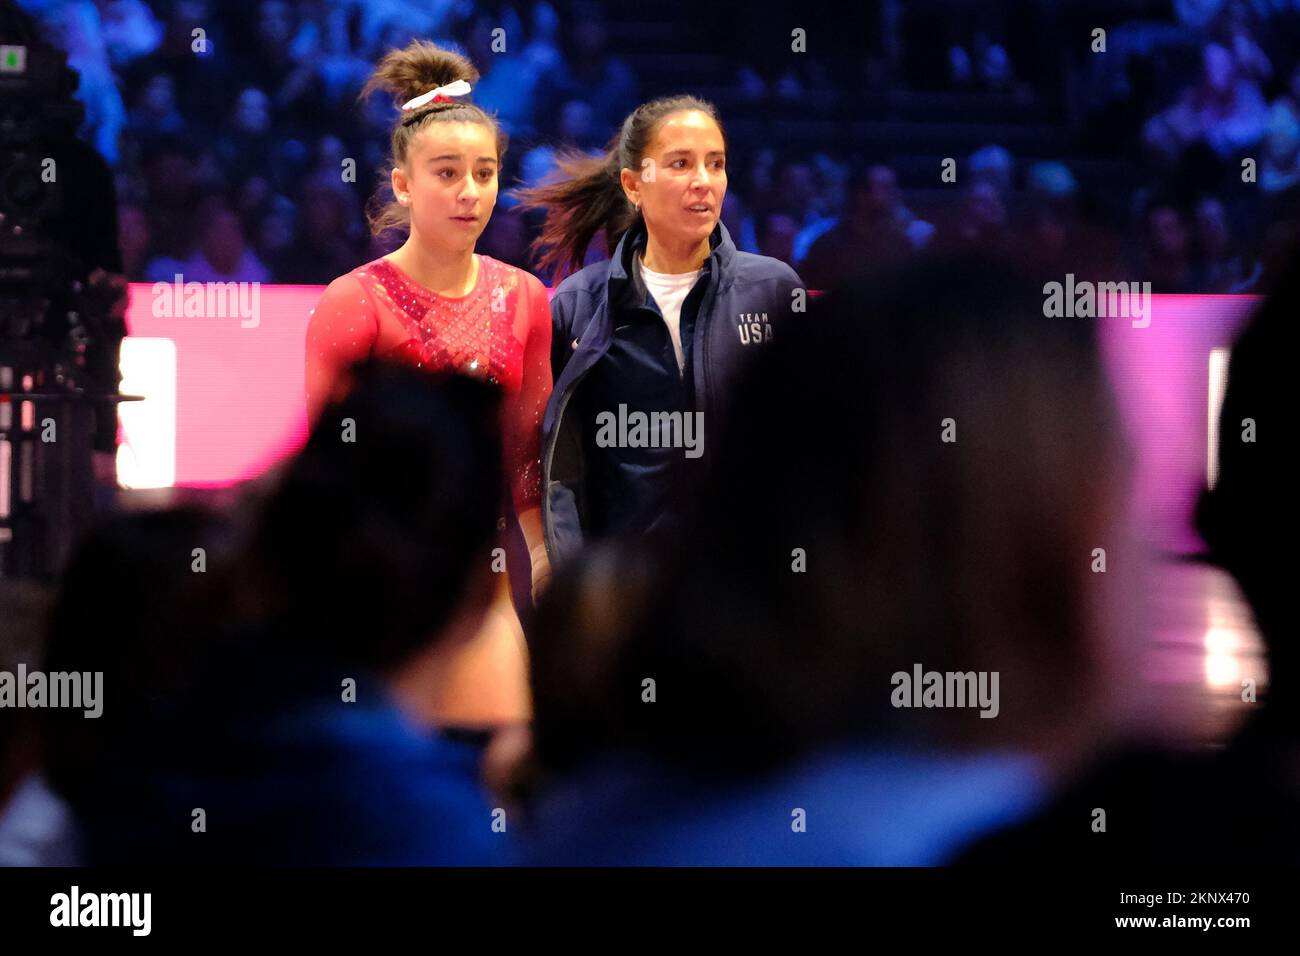 November 27, 2022, Zurich, Switzerland: American Addison Fatta and her coach,  the mother Jen, after performing her vault exercise at first round during  Swiss Cup Zurich 2022 gymnastics tournament at Hallenstadion. (Credit